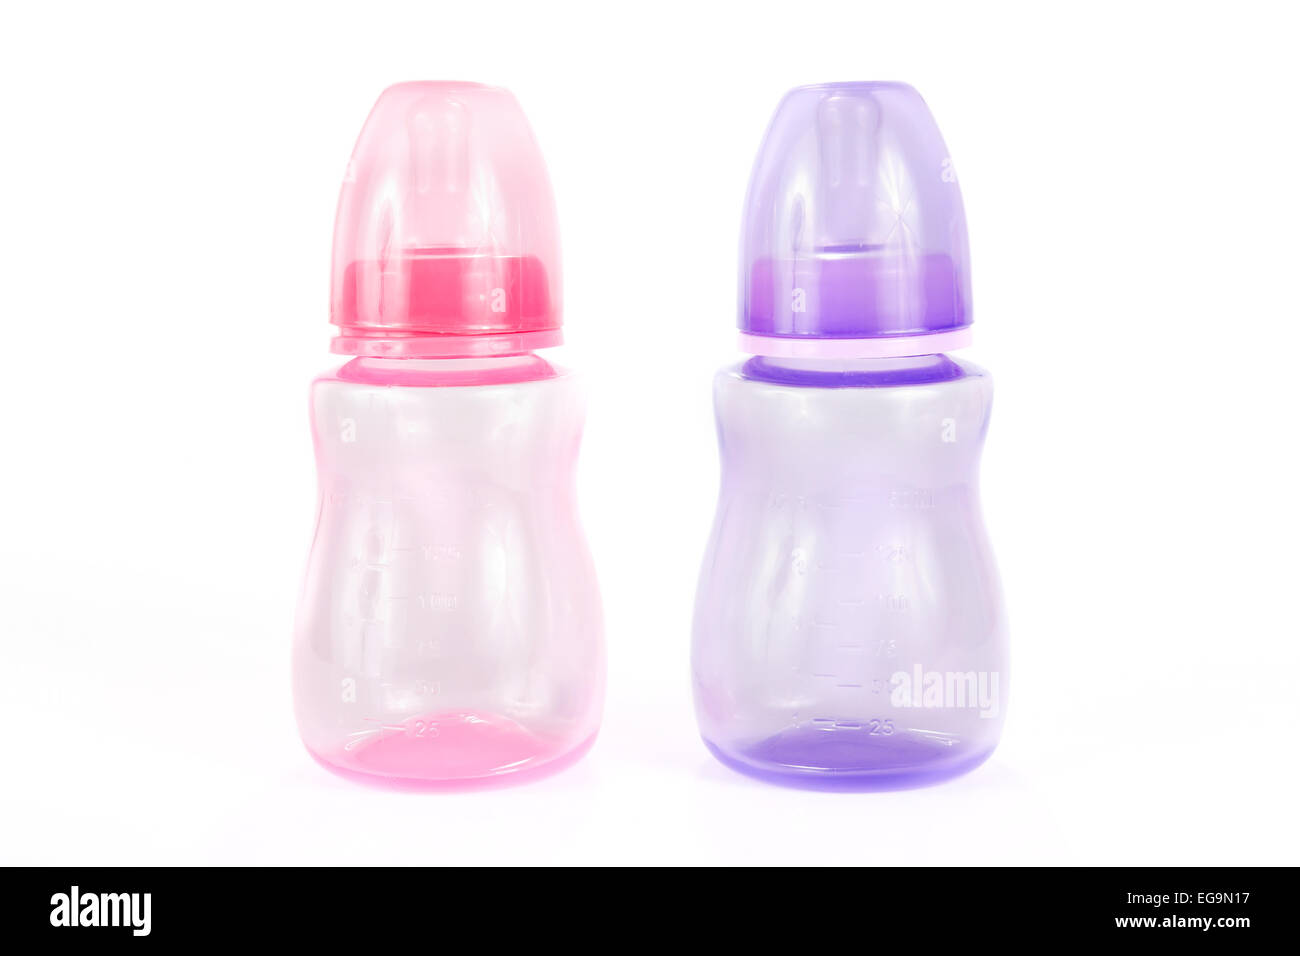 Pink and purple babies bottles over white Stock Photo